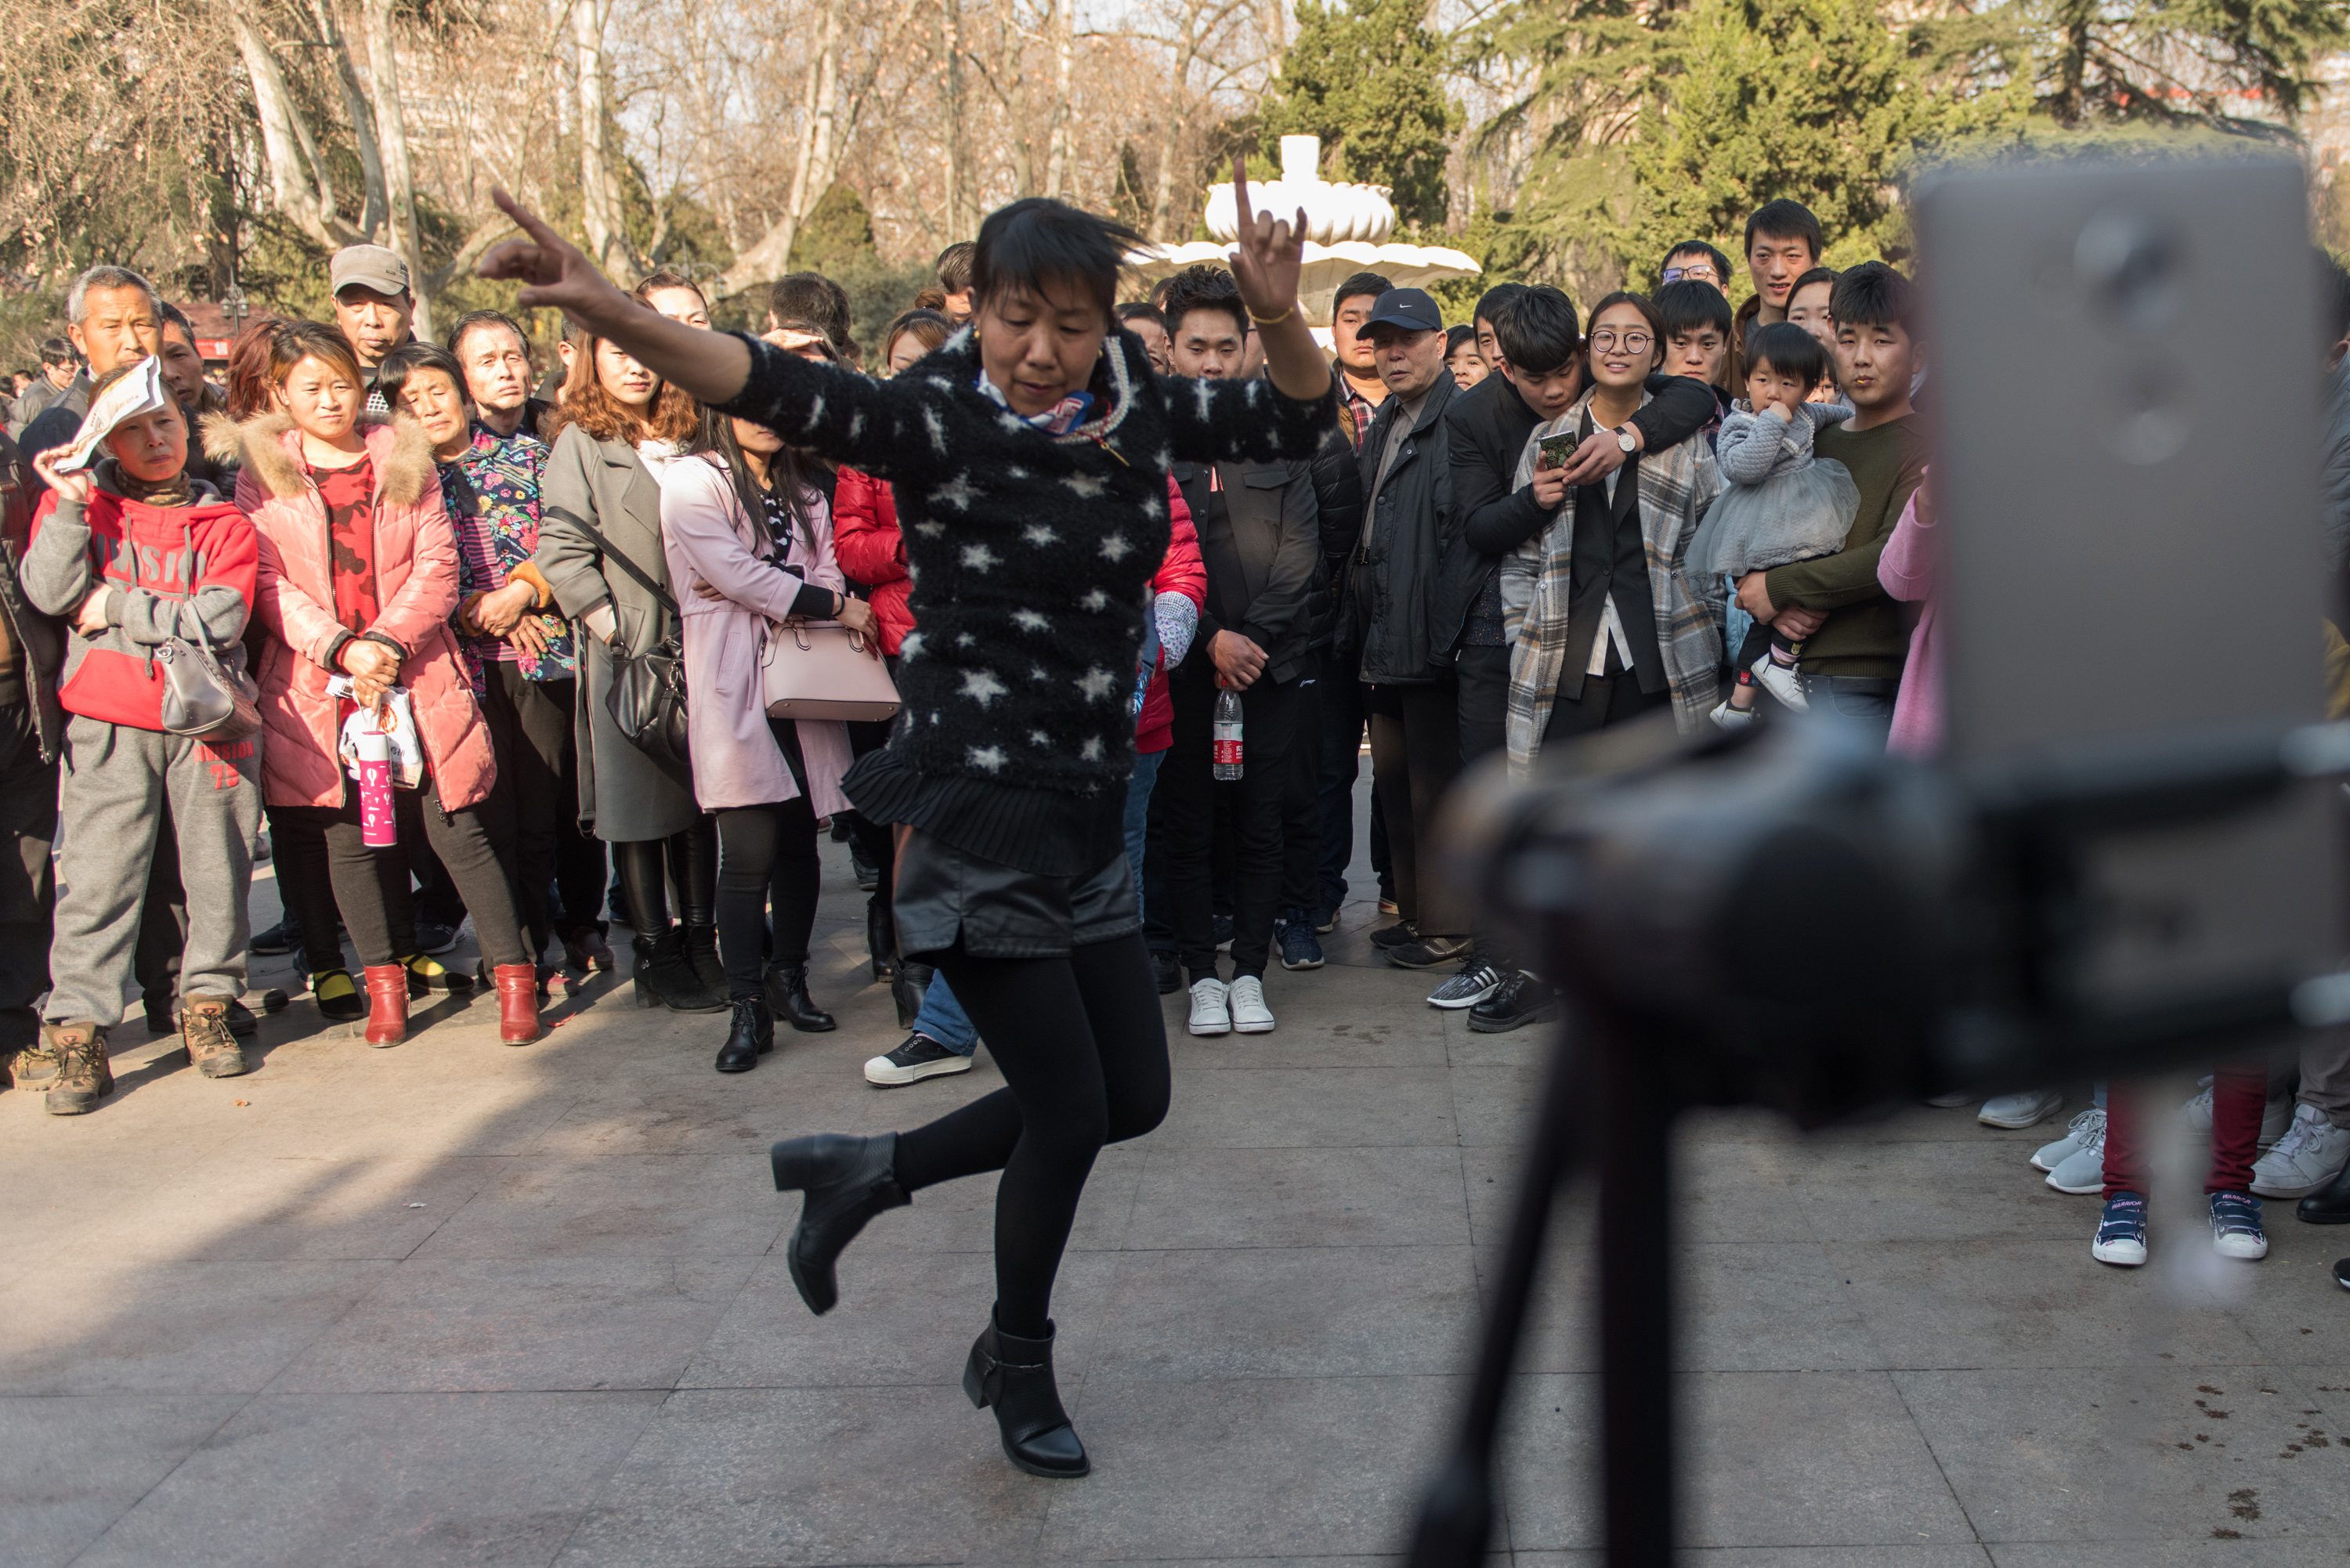 Wang Lingzhi performs in front of a crowd and a live-streaming smartphone. She is known as Grandma Two Pistols, as she often holds her hands in the shape of two pistols. Photos: Chen Liang/Caixin